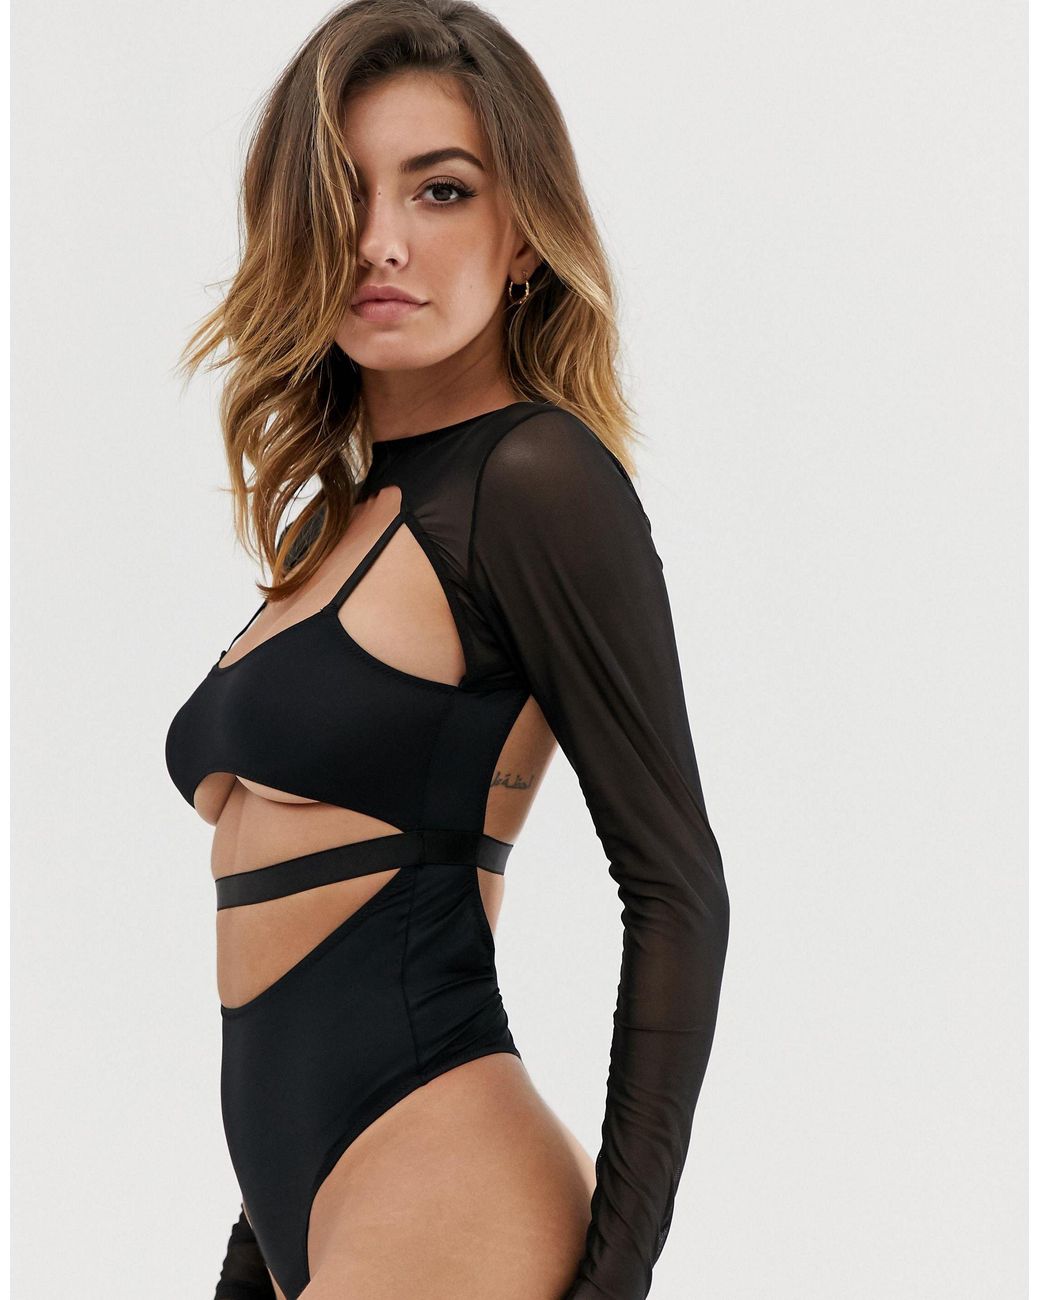 ASOS Louanna Long Sleeve Mesh Cut Out Strappy Bodysuit in Black | Lyst